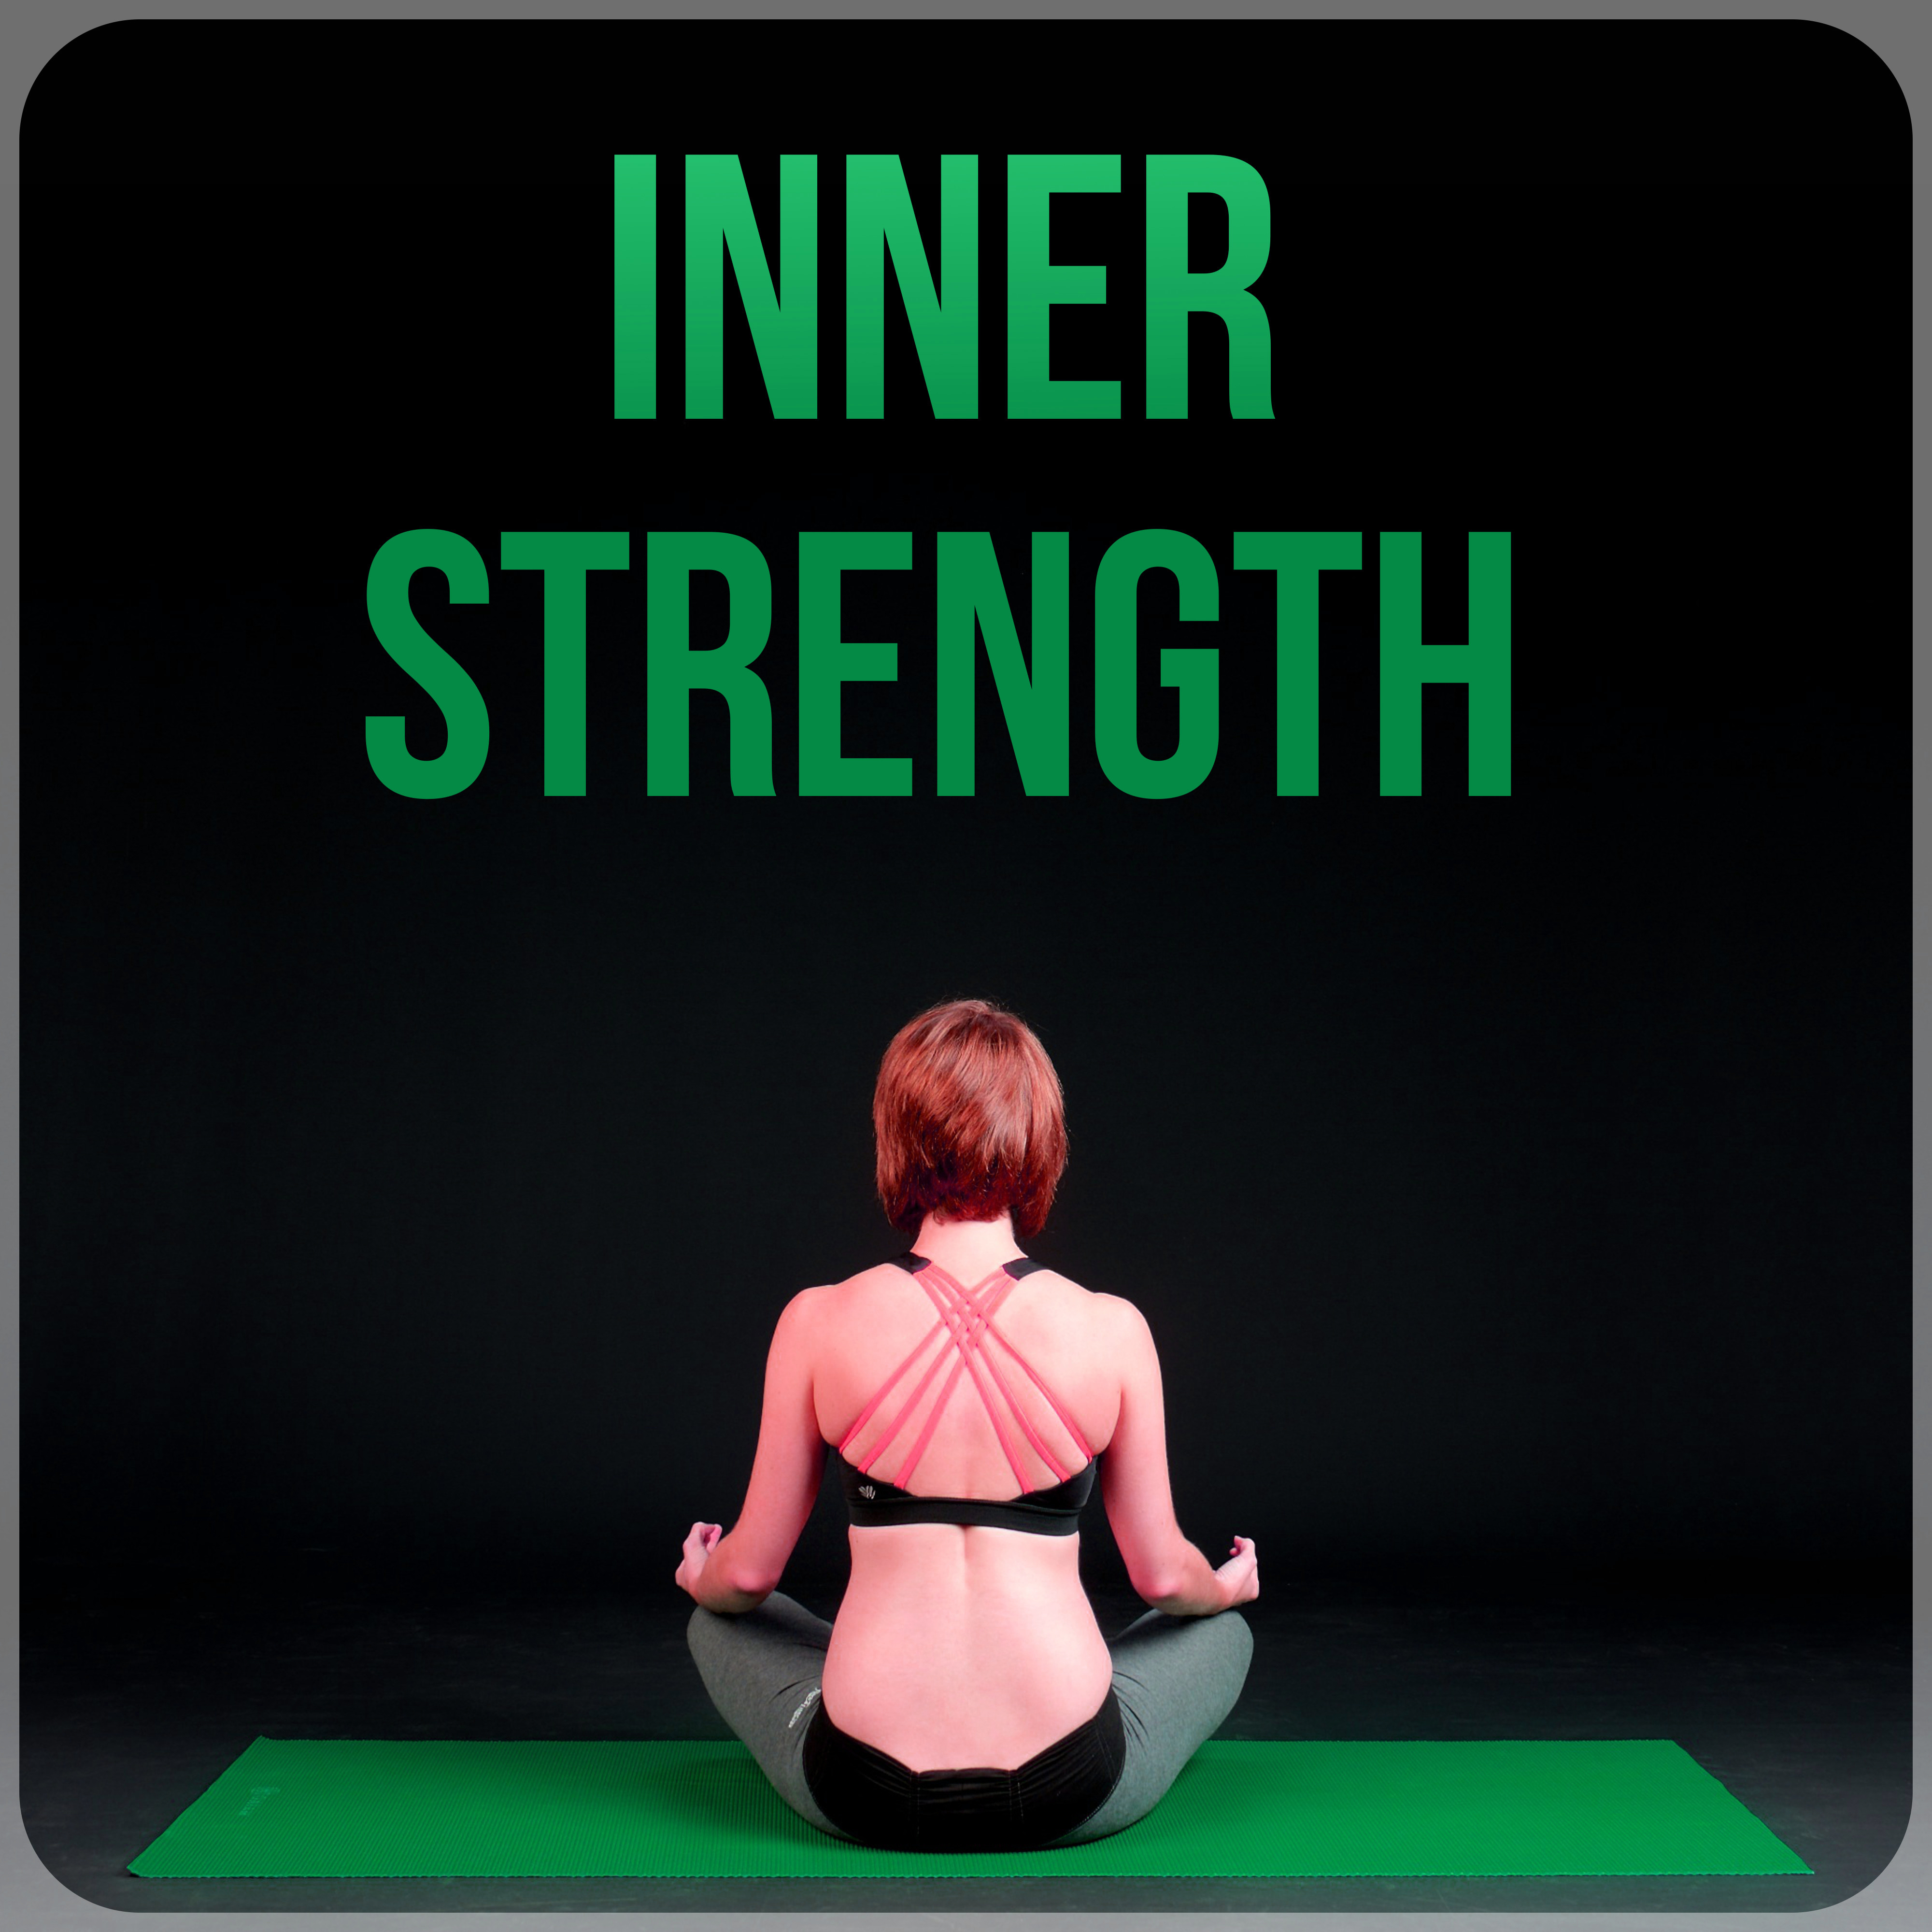 Inner Strength - Calm Your Spirit, Hindu Yoga, Mindfulness Meditation & Relaxation with Flute Music